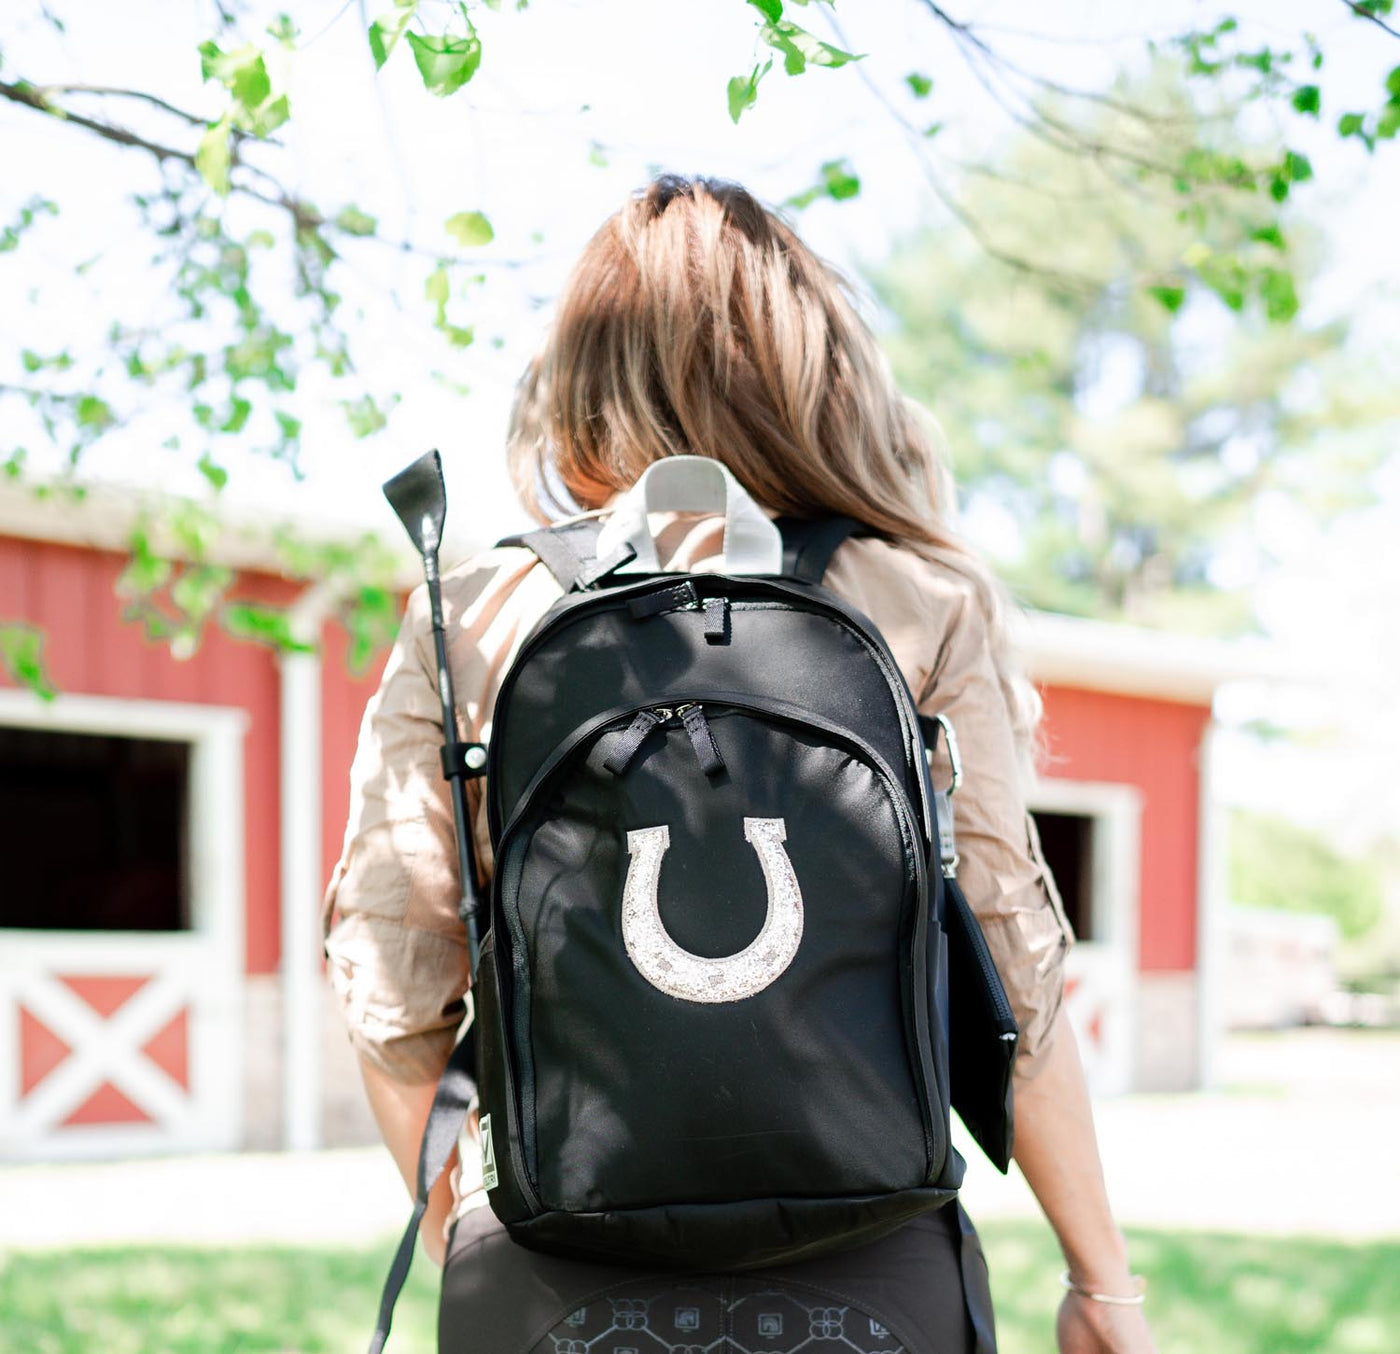 Novelty Delaire Backpack - “Horse Shoe” (custom embroidered - allow an additional 5 business days to ship)